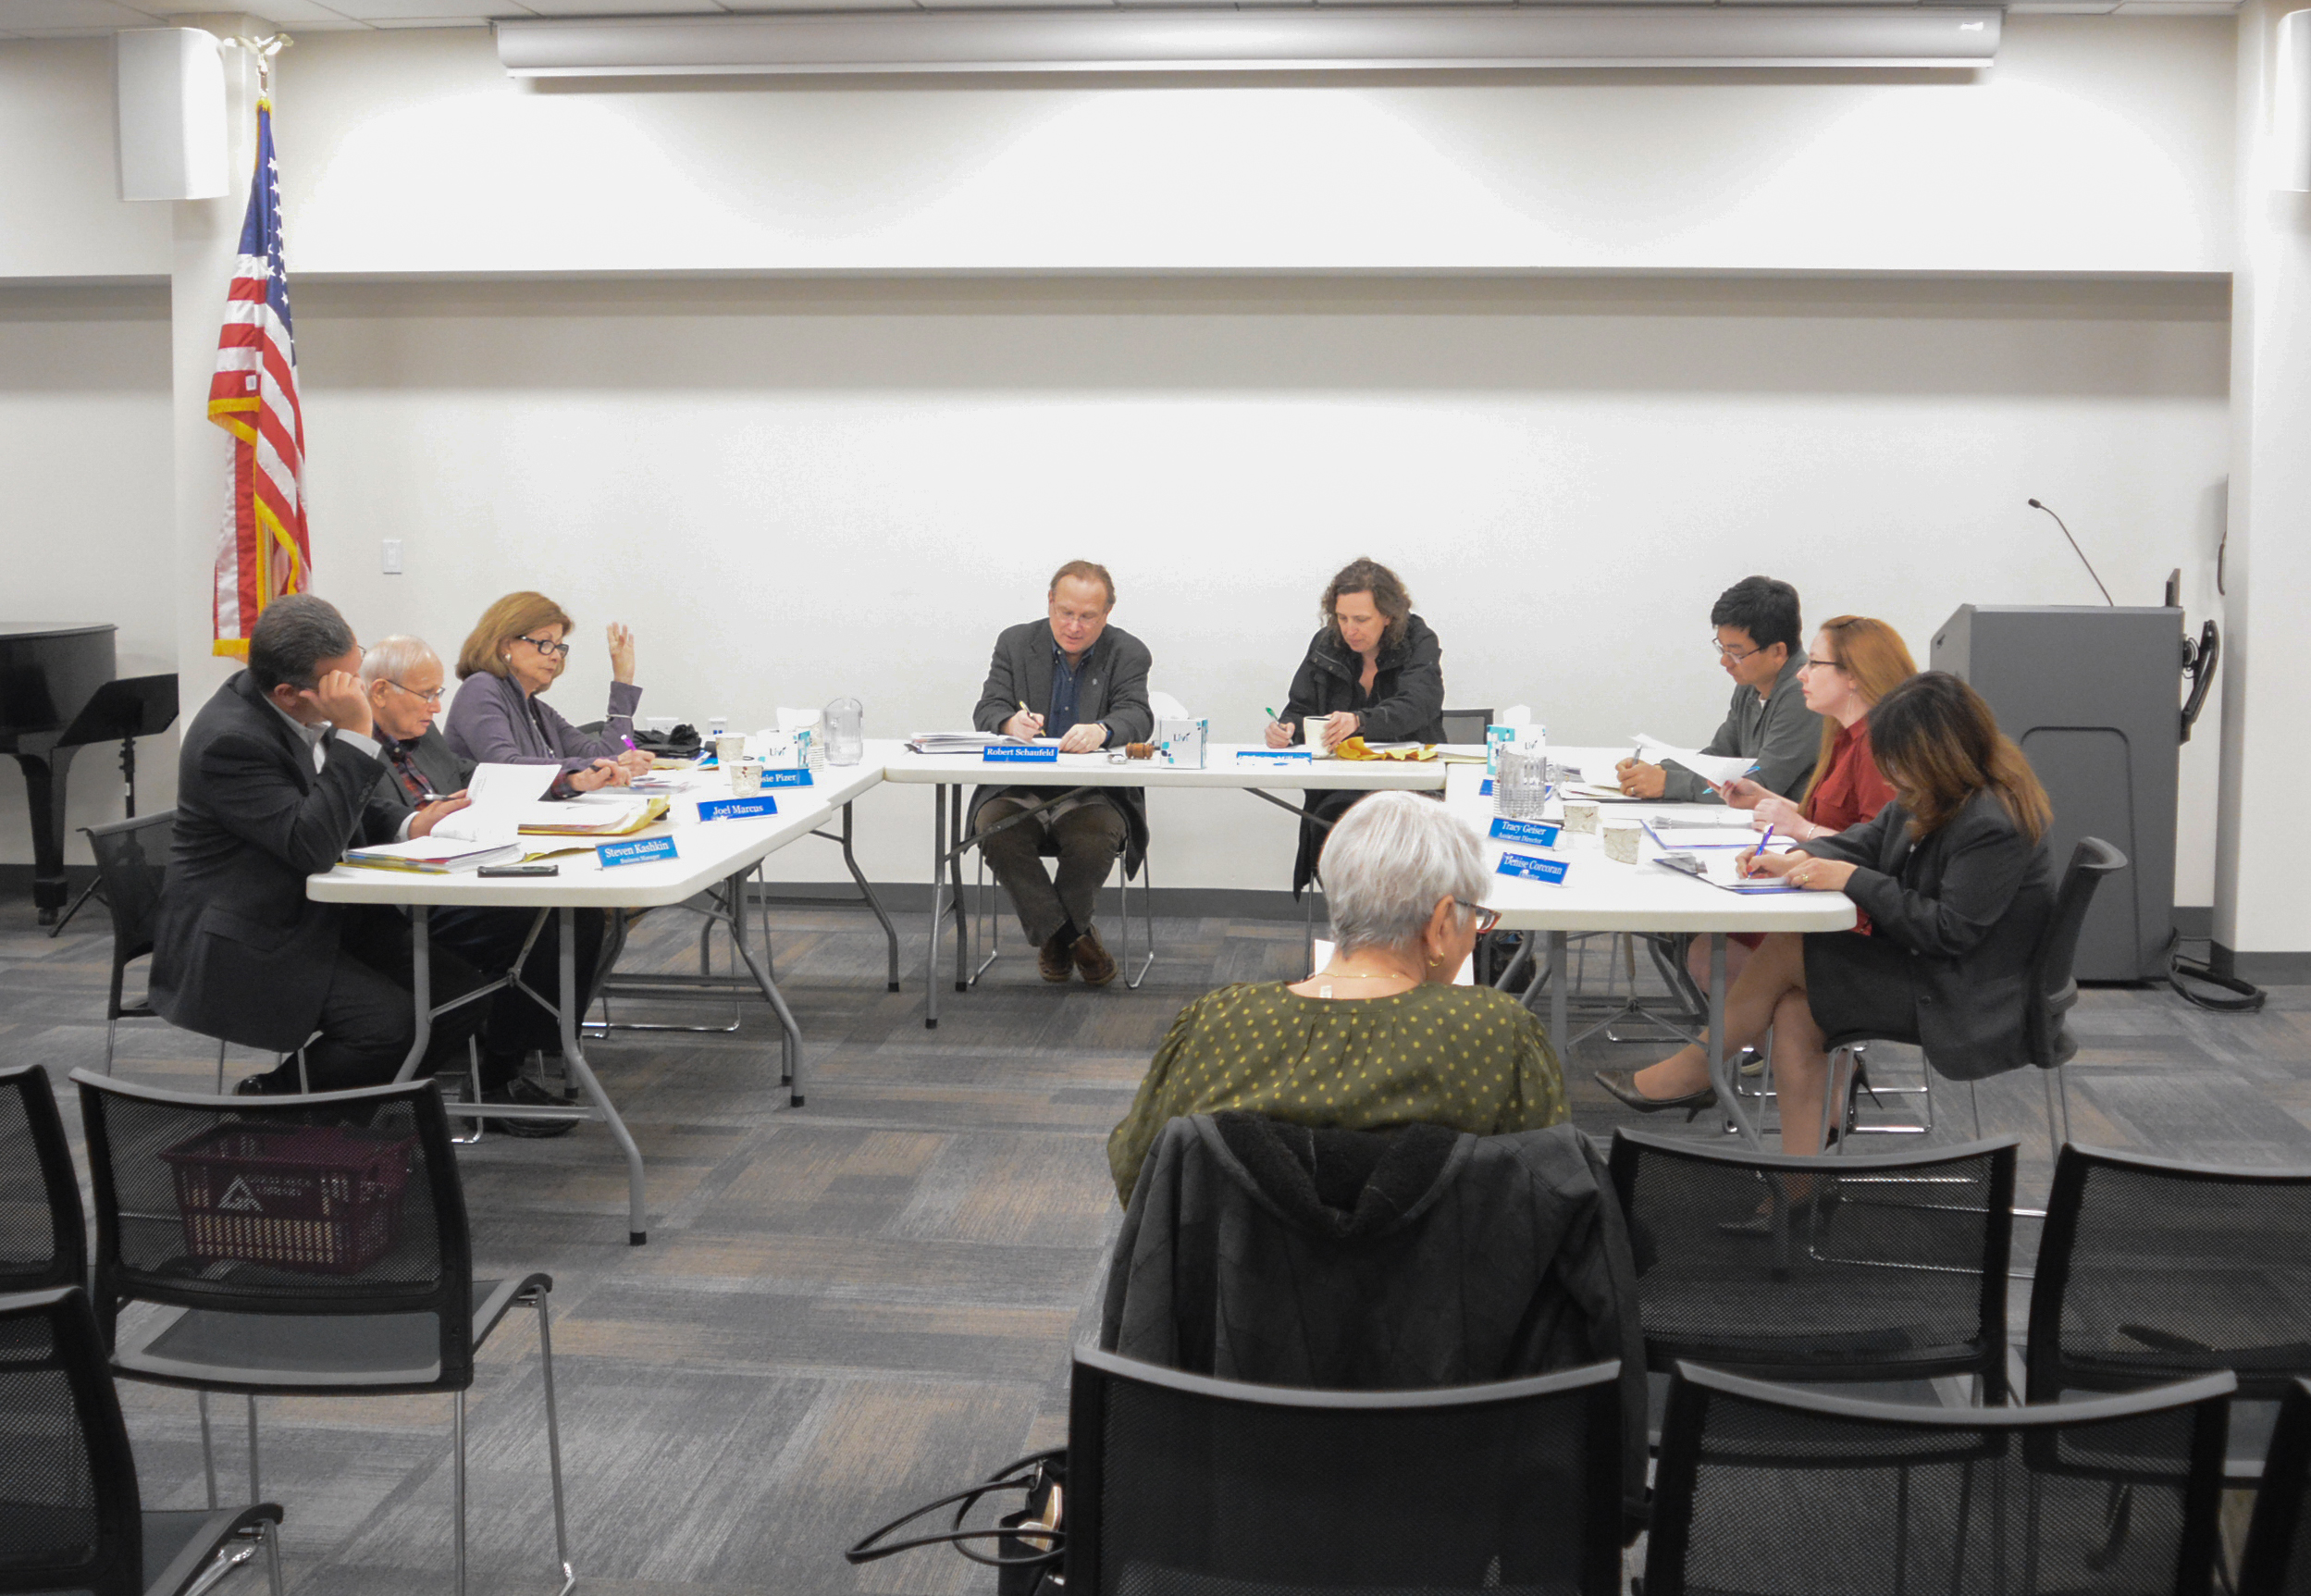 There are currently six members on the board: Robert Schaufeld, Rebecca Miller, Weihua Yang, Josie Pizer, Joel Marcus and Barry Smith, who is not pictured here. (Photo by Janelle Clausen)